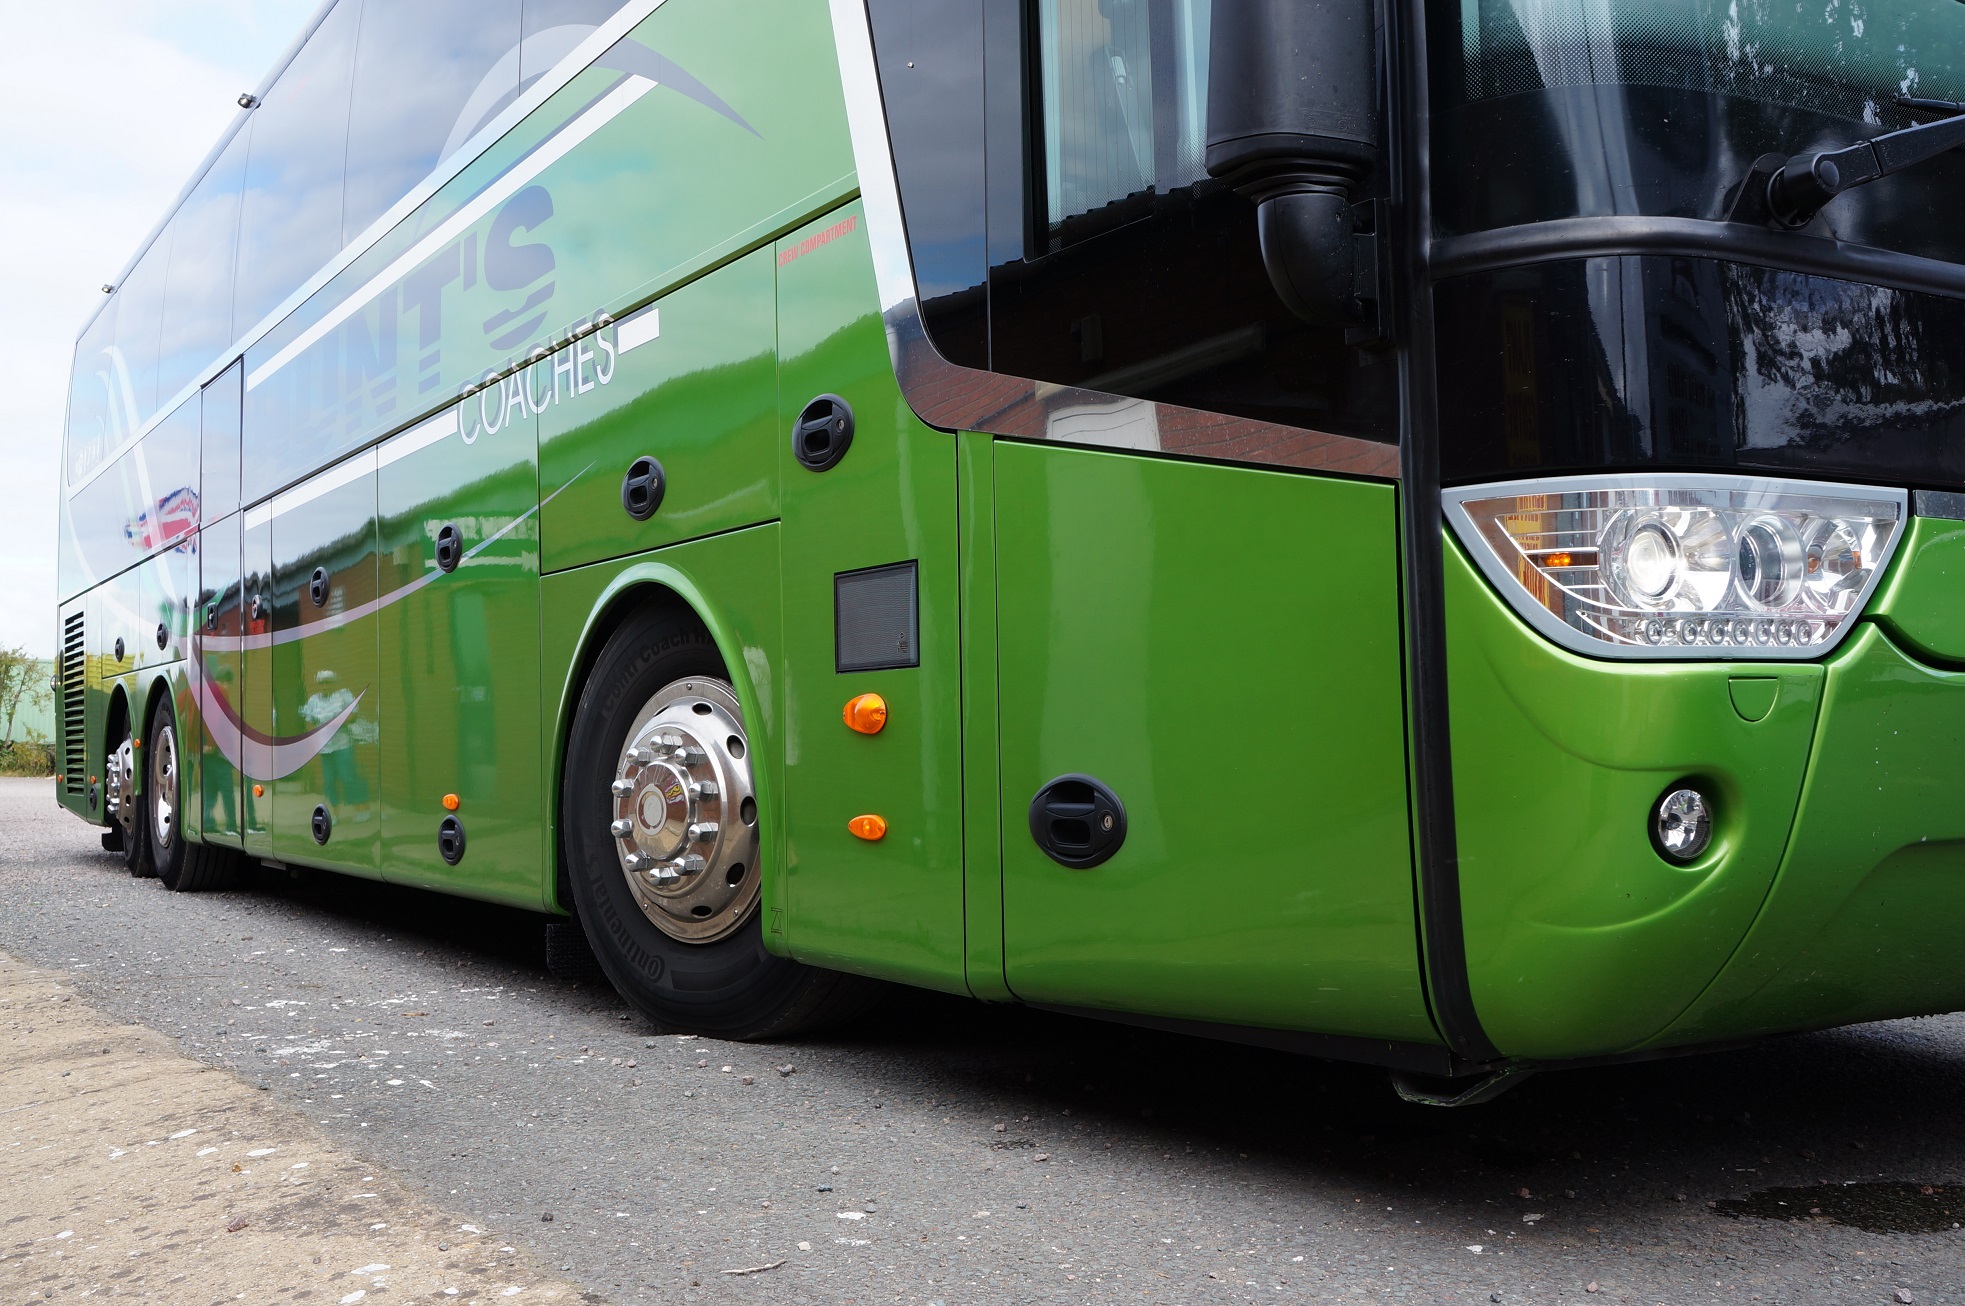 DfT claims to support coach decarbonisation